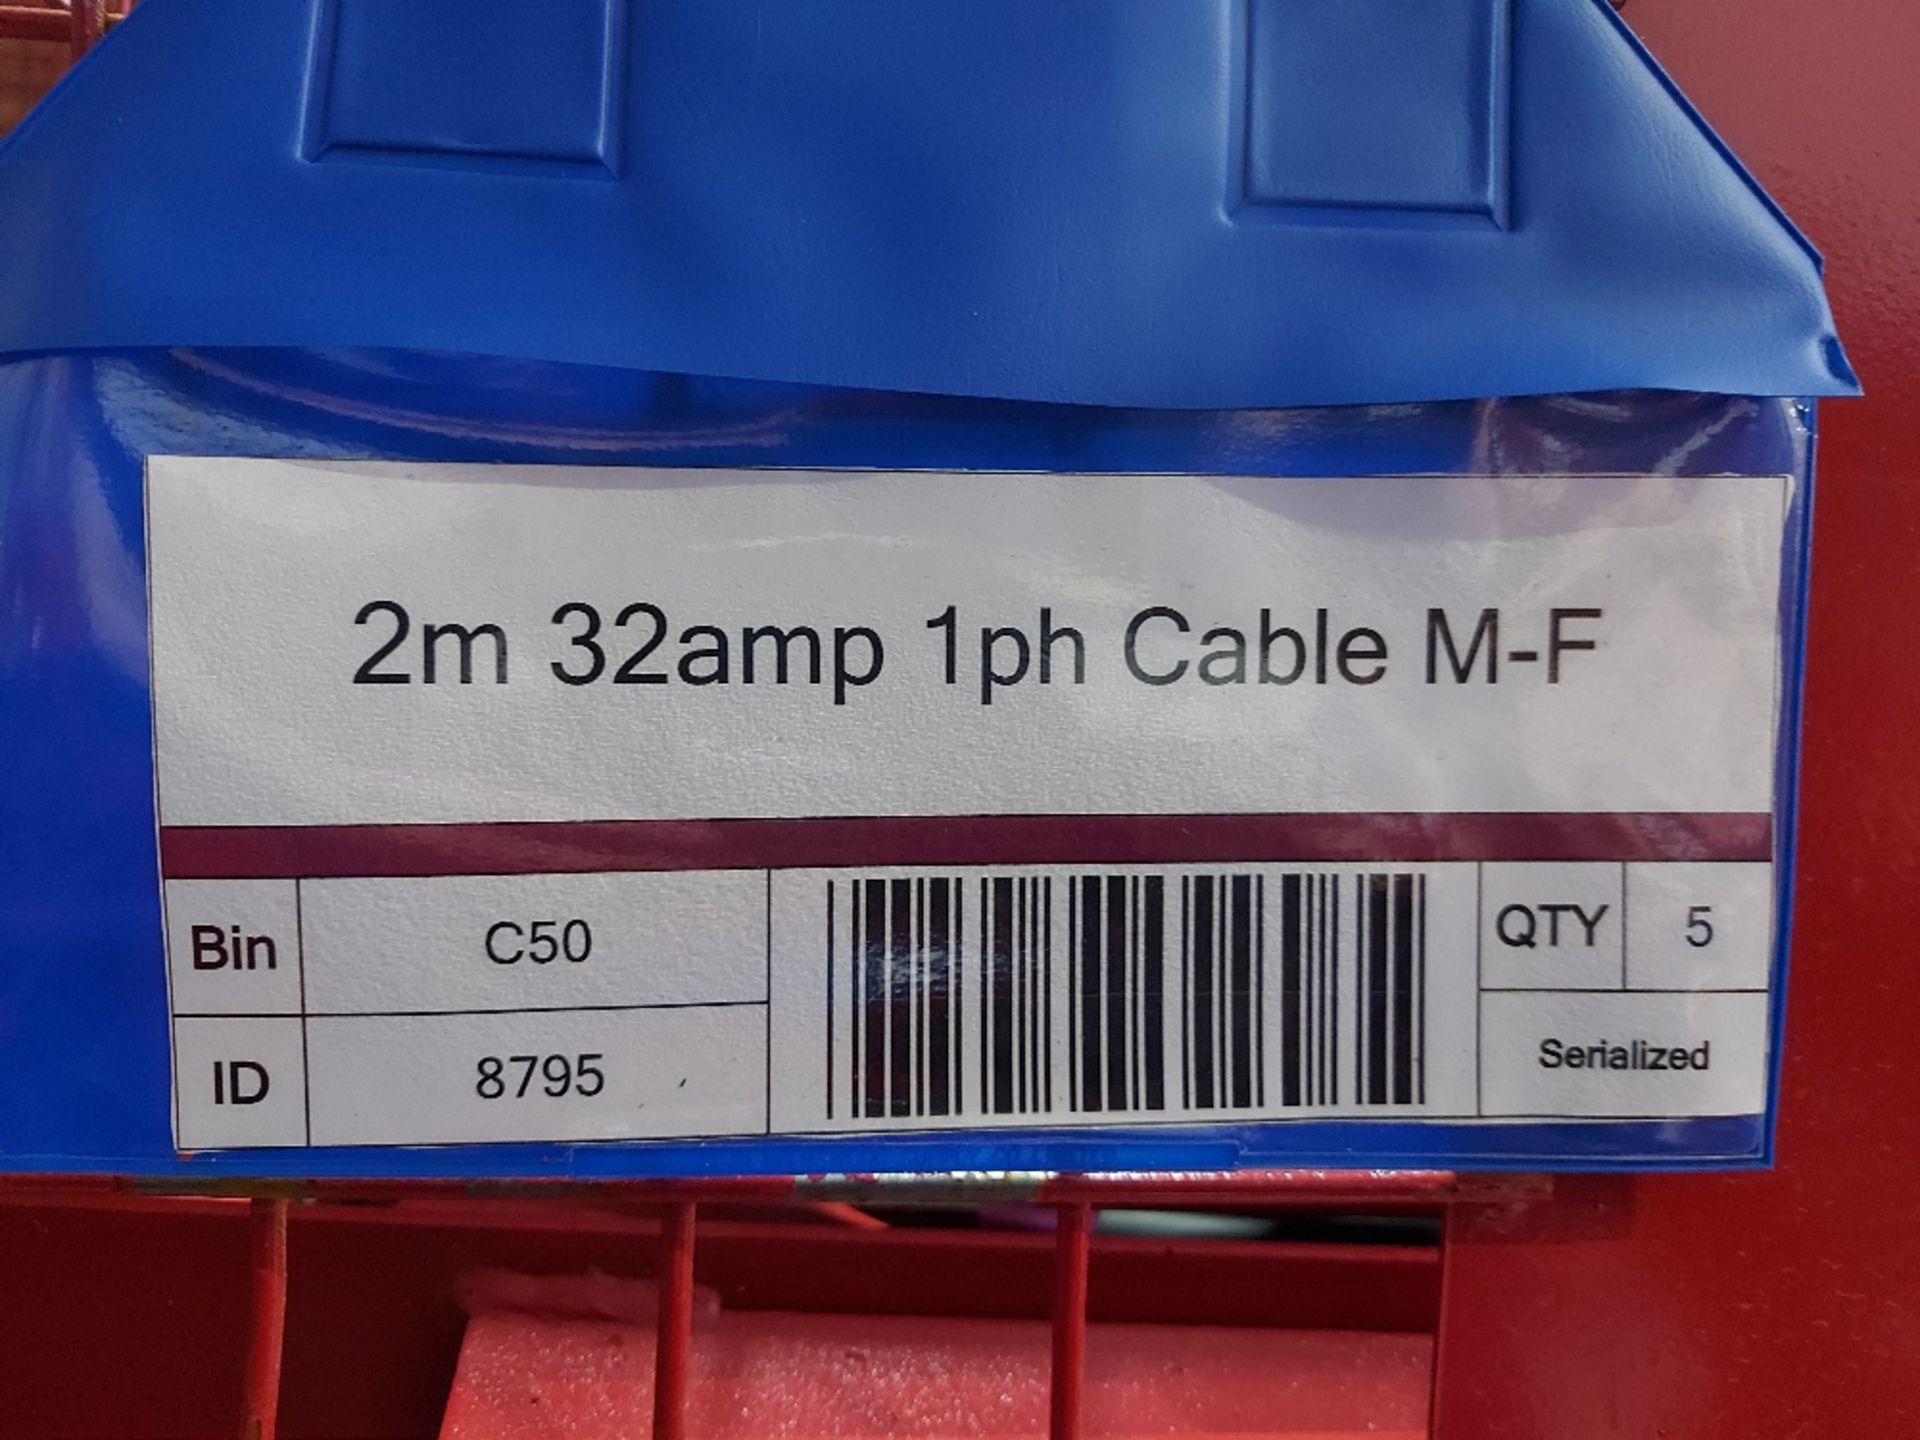 Large Quantity of 15m 32amp 1ph Cable M-F & 2m 32amp 1ph Cable M-F Steel Fabricated Stillage - Image 4 of 5